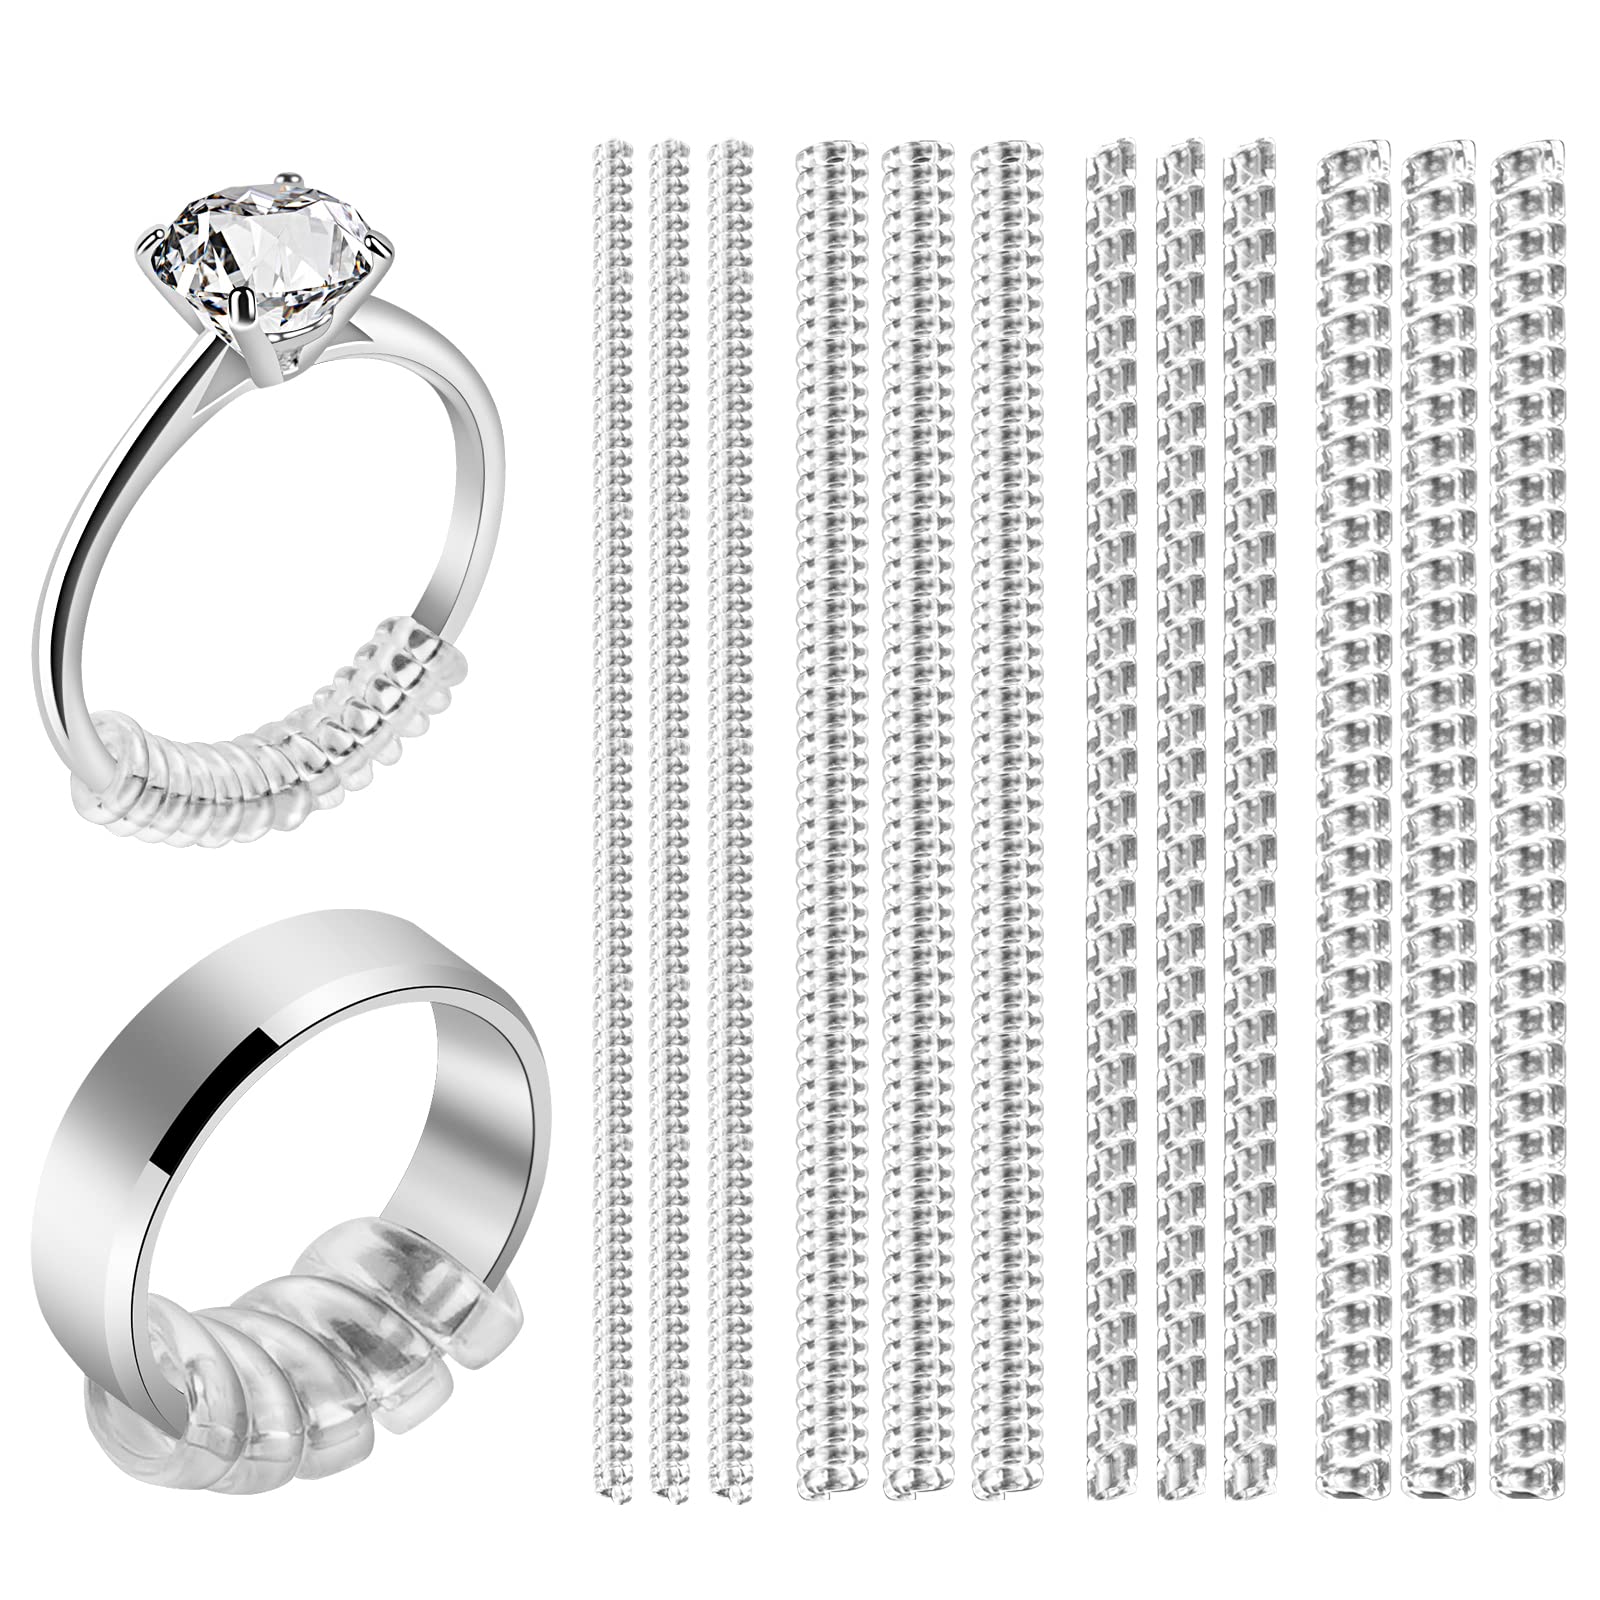 72 Sheets Ring Size Adjustment Ring Size Adjuster Ring Sizer Ring Size  Reducer Ring Fitter for Loose Rings Ring Guard Mens Jewellery Jewelry  Fitter